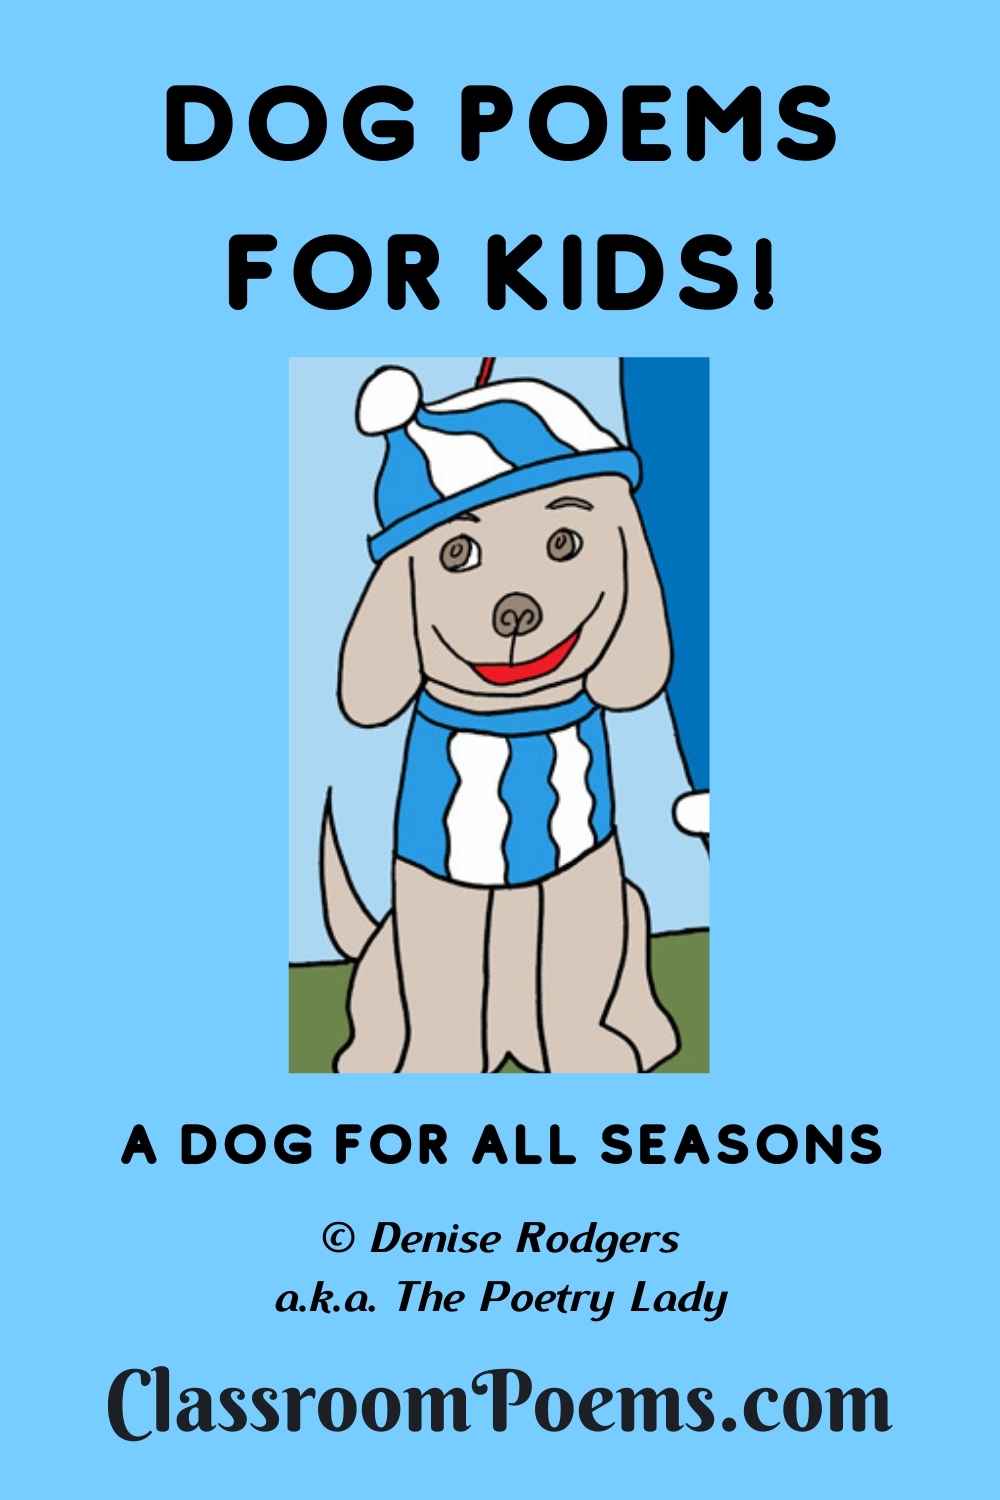 A DOG FOR ALL SEASONS, a funny dog poem for kids by Poetry Lady Denise Rodgers on ClassroomPoems.com.